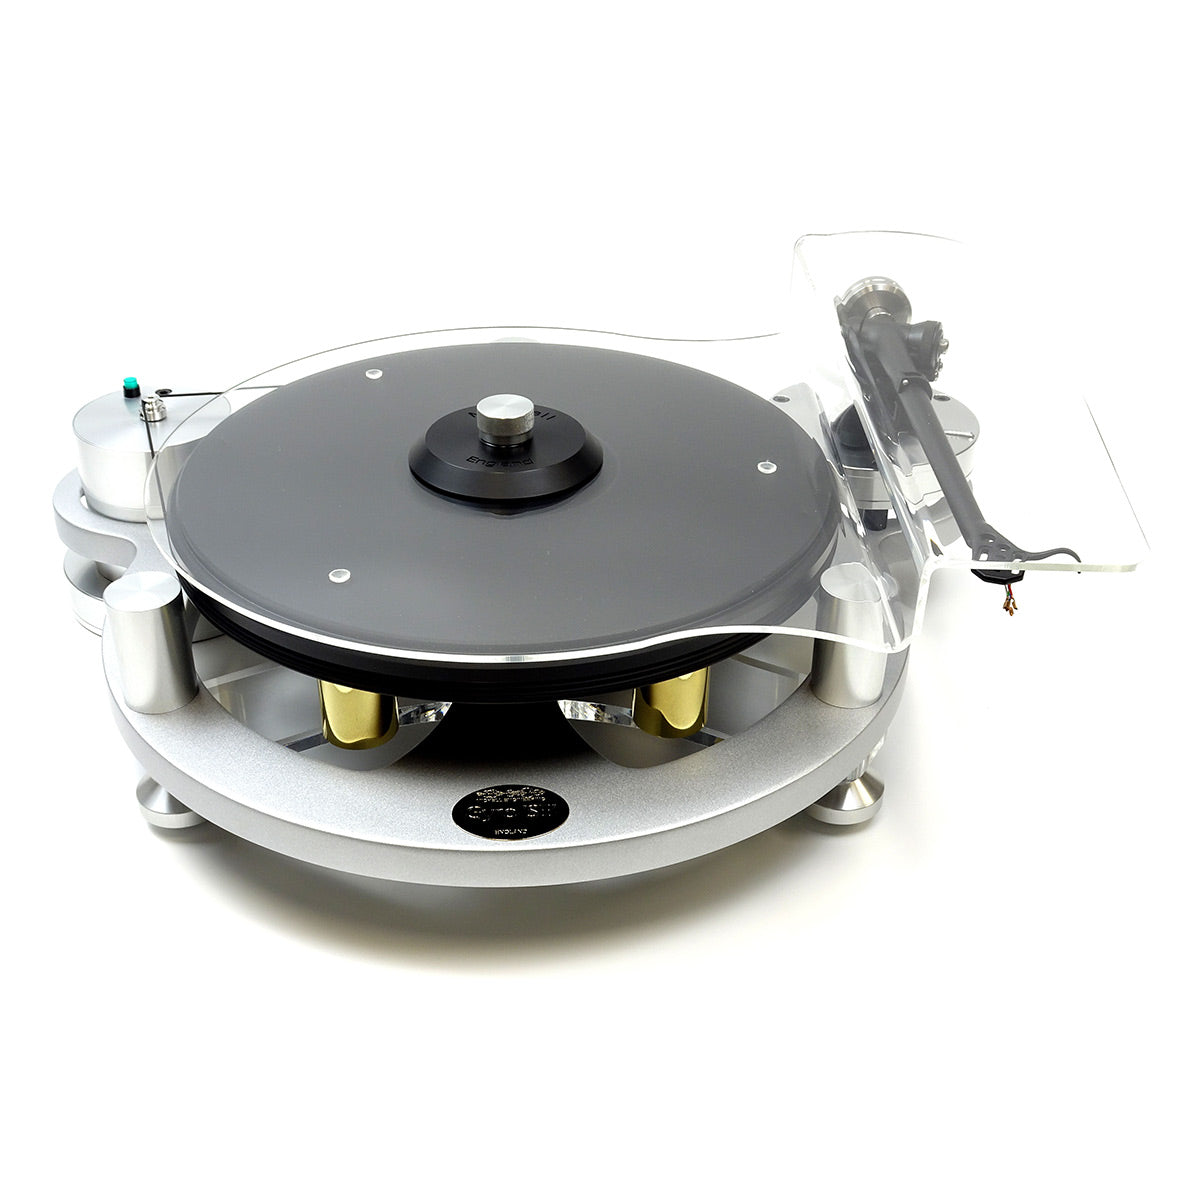 Michell Gyro SE Turntable Bundle with T8 Tonearm, Record Clamp, and UniCover (Silver)